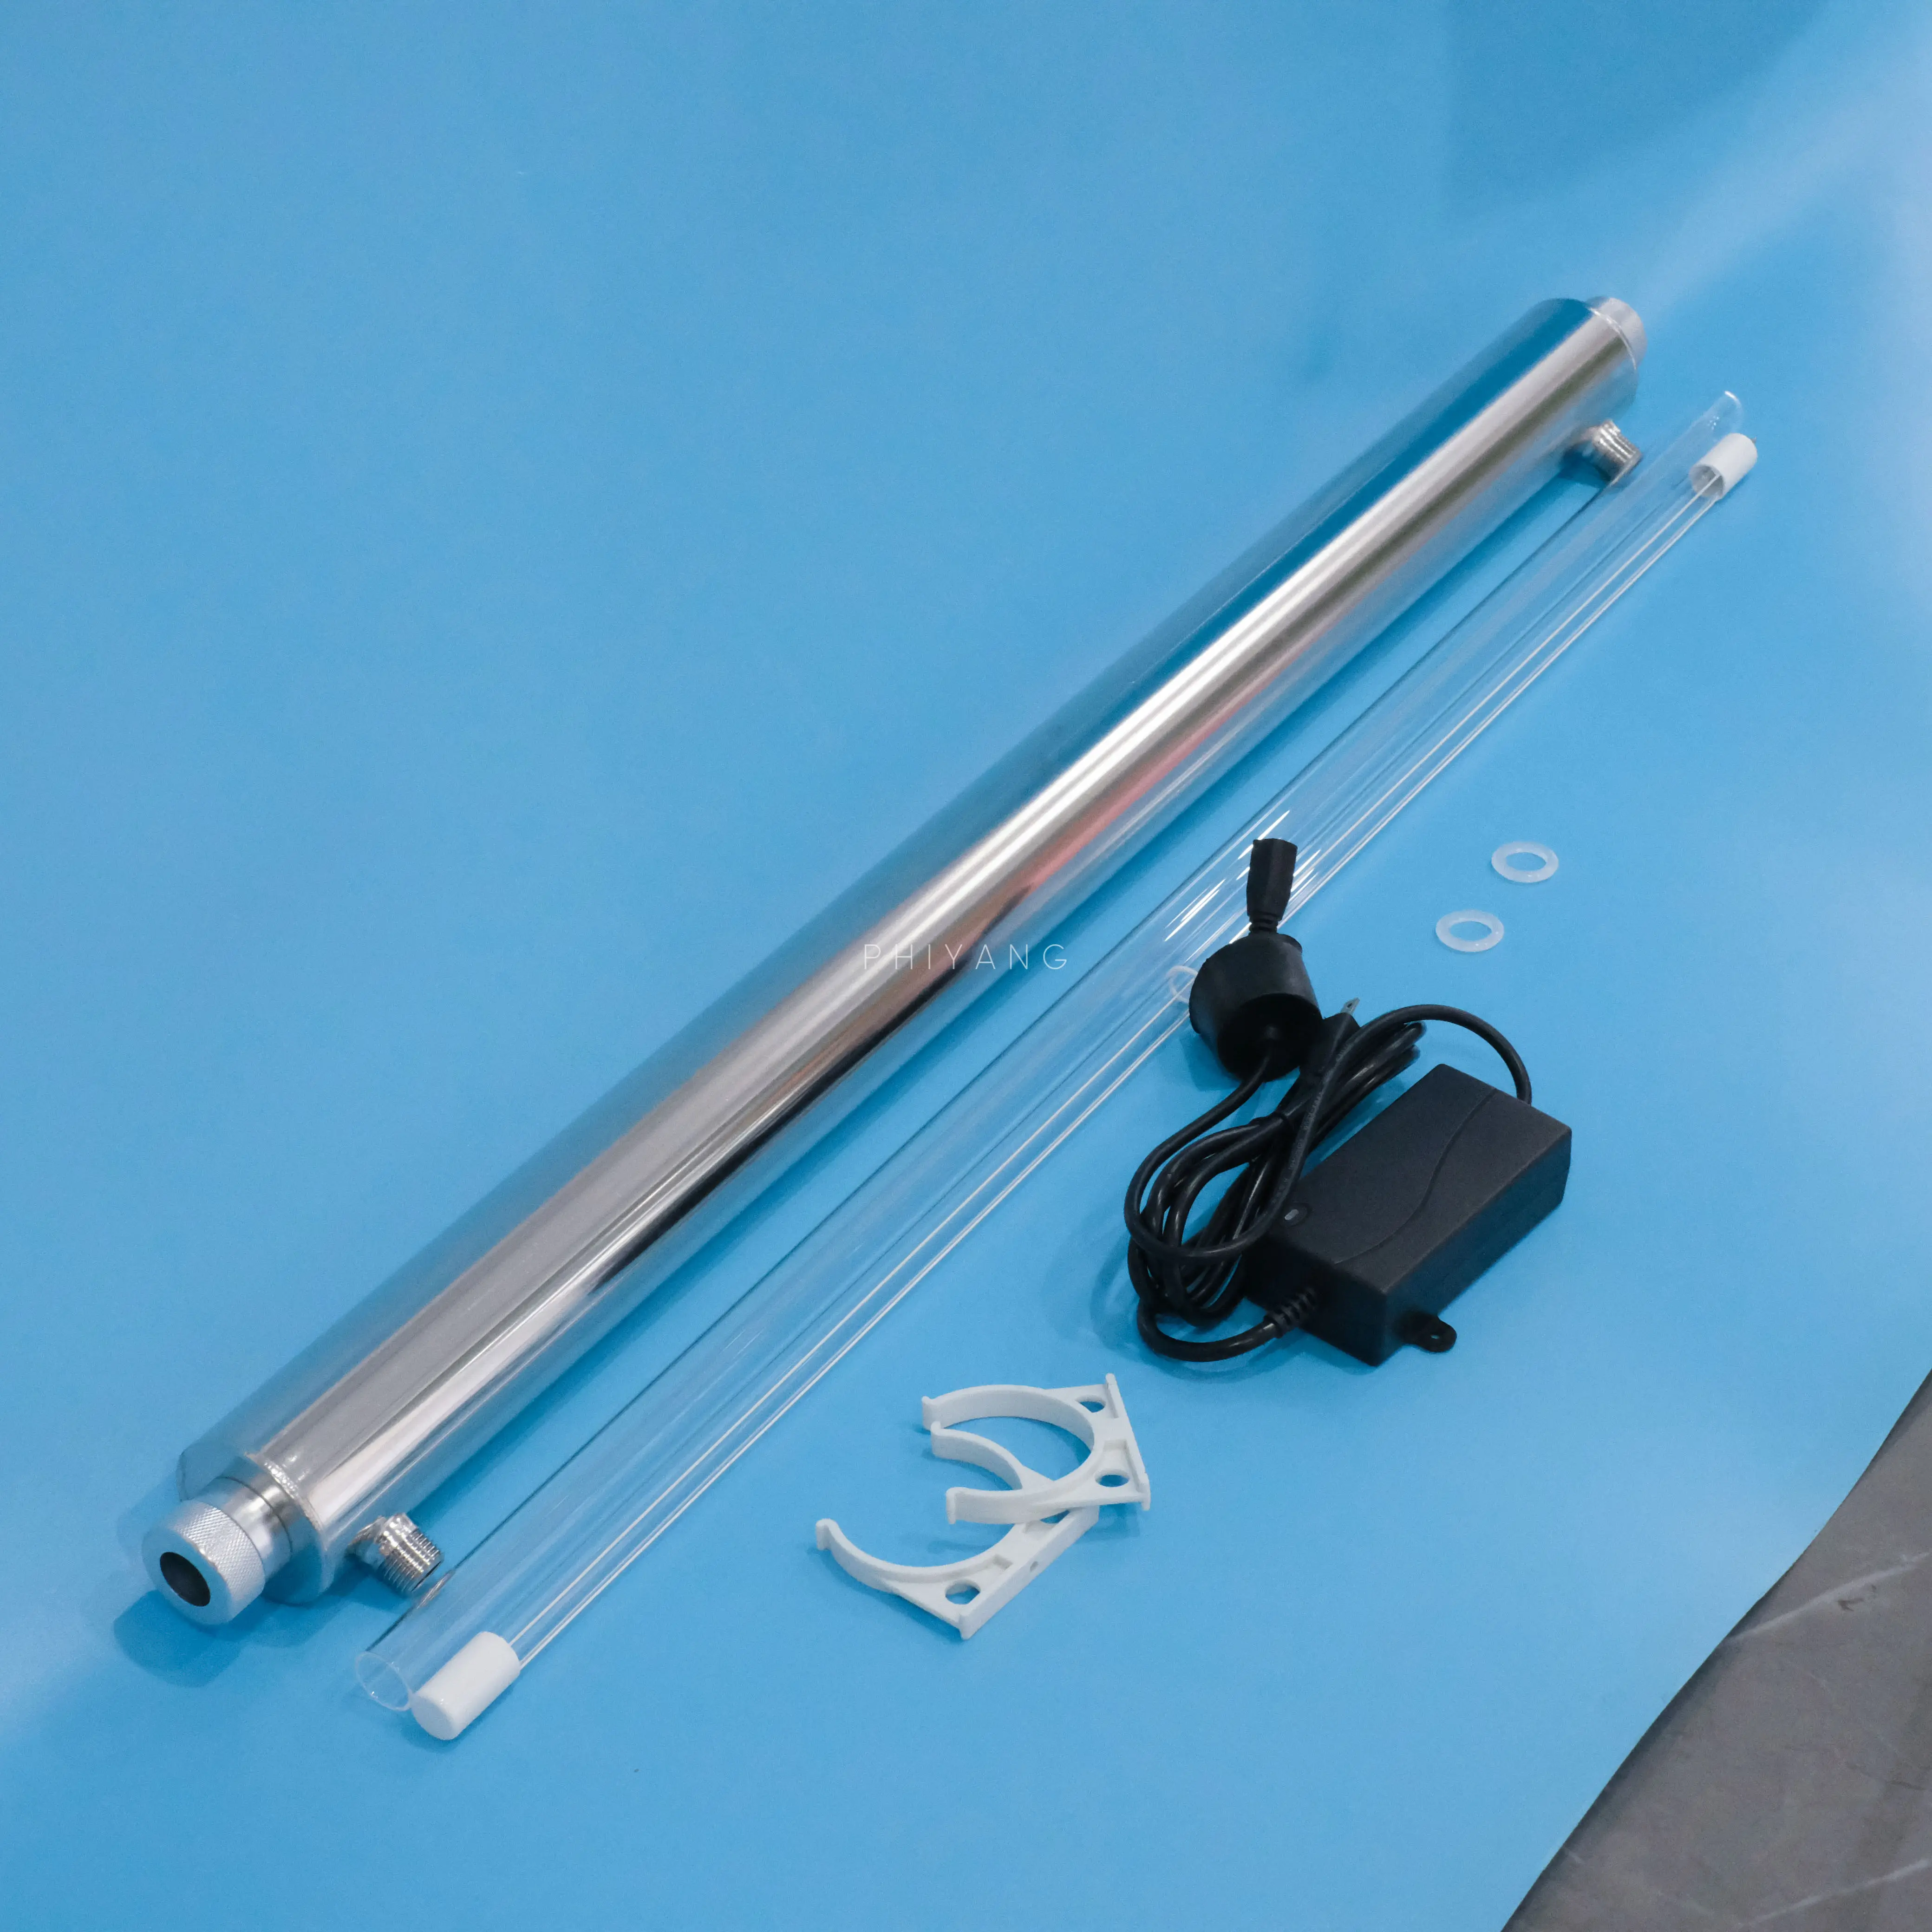 uv water steril 55W Ultraviolet Disinfection lamp UV Water Purifiers 12GPM UV Lamp/Quartz Sleeve Included